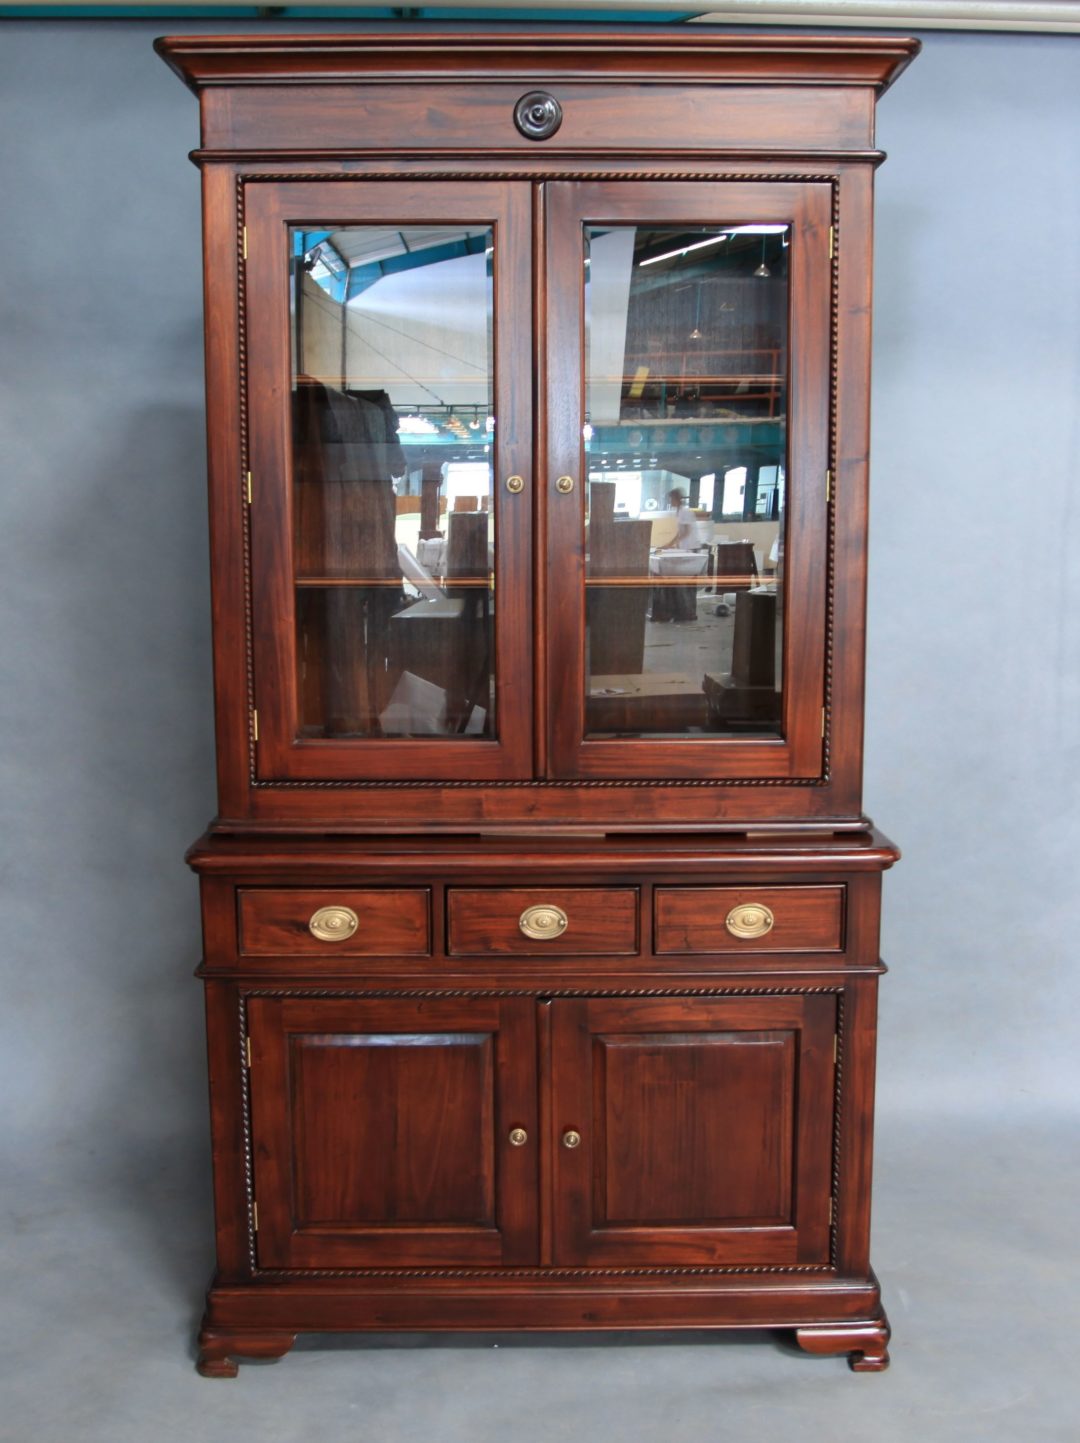 Mahogany Wood Display Cabinet With Cupboard And Drawers Turendav Australia Antique